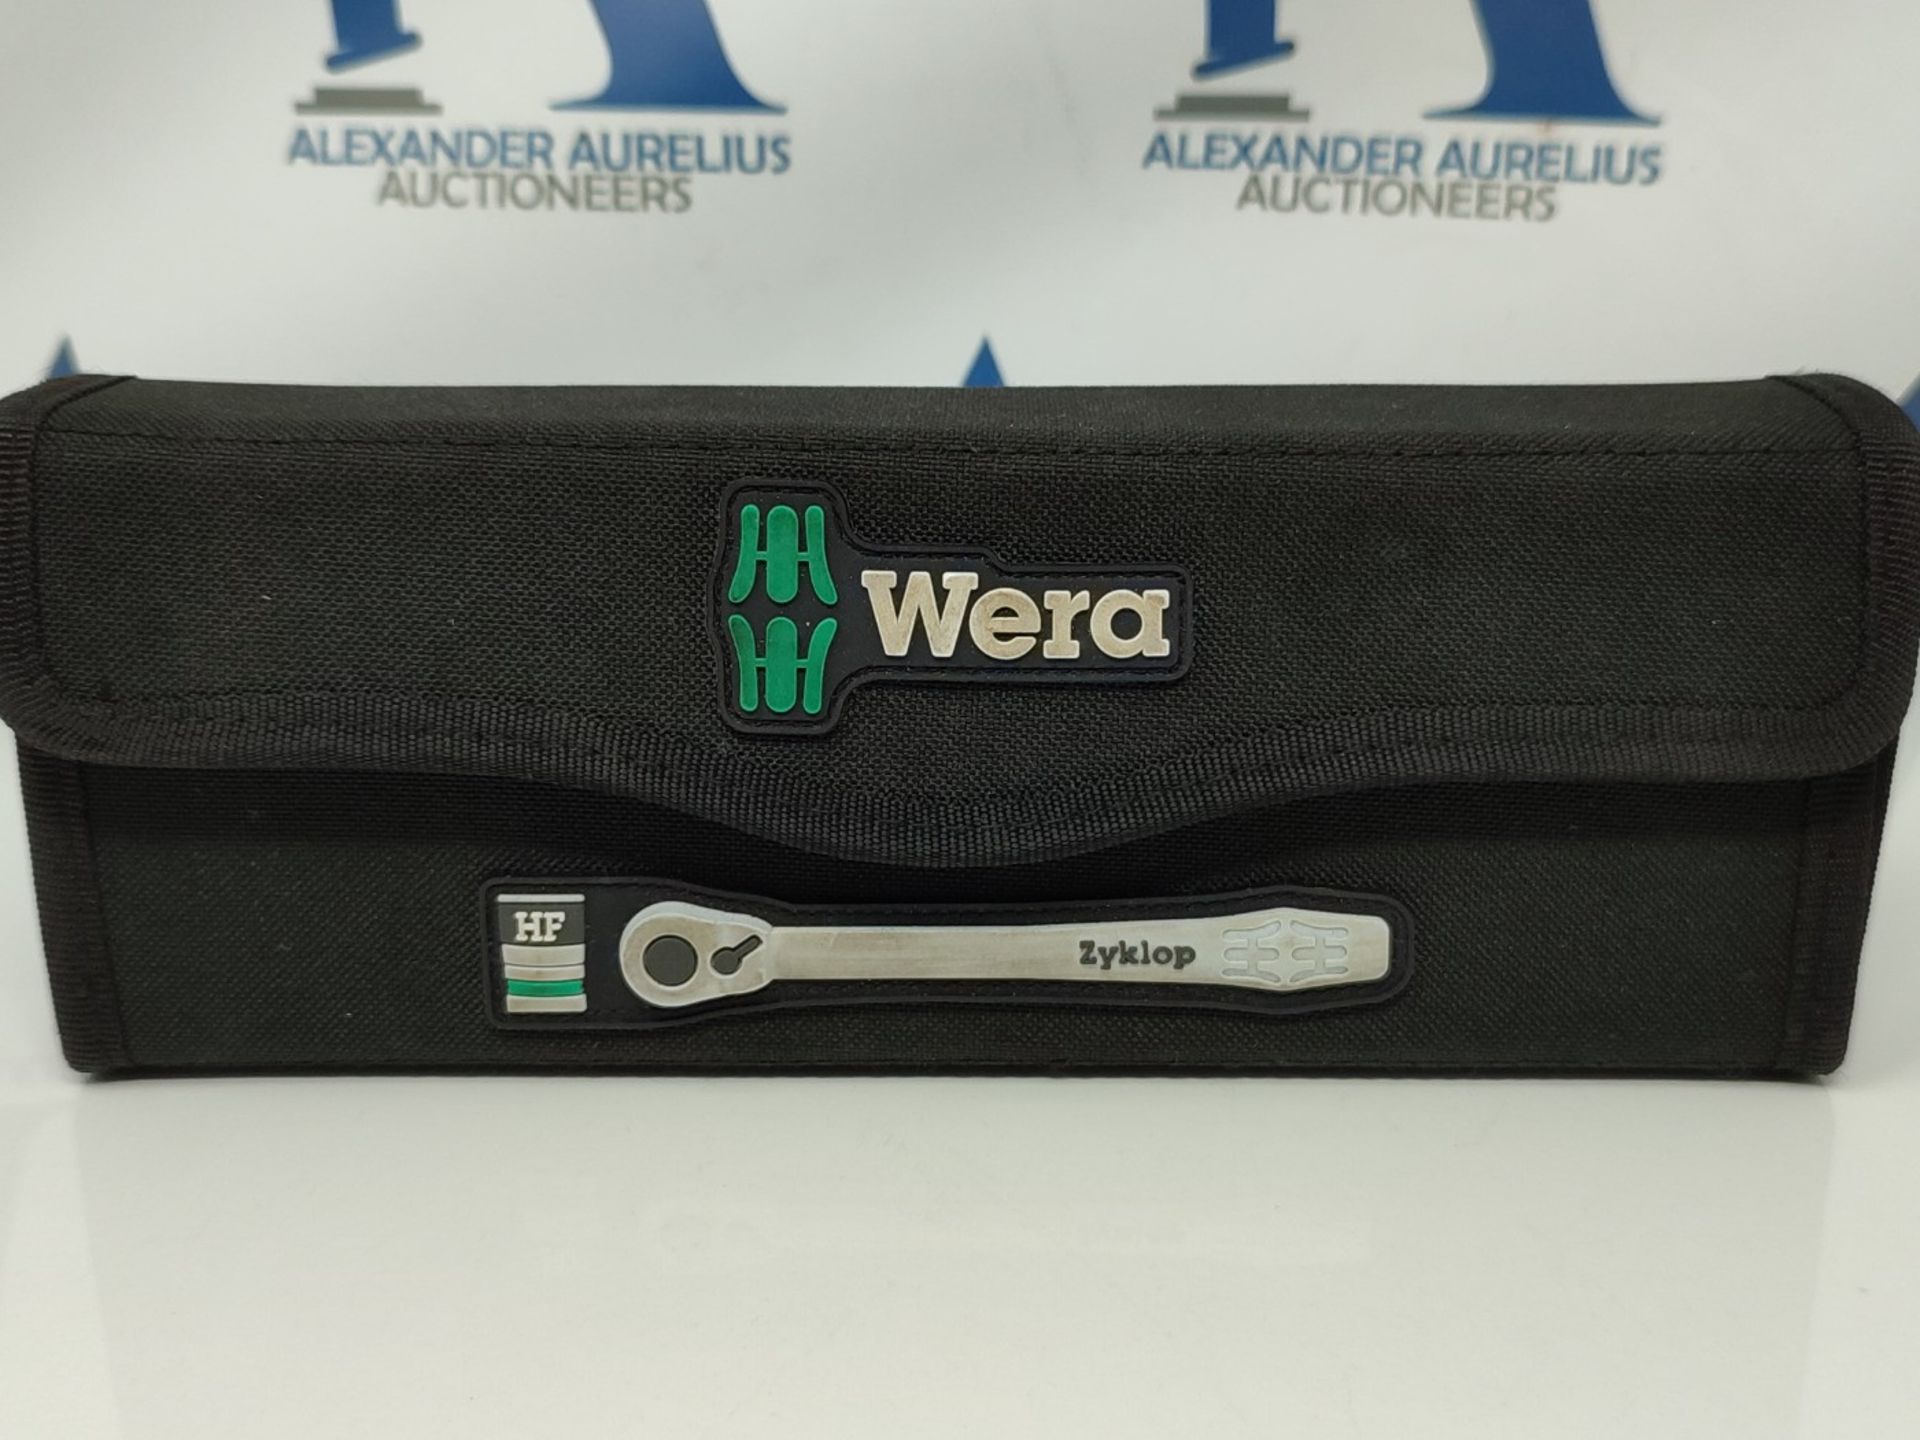 RRP £79.00 Wera 05004018001 8100 SA 8 Zyklop Metal Ratchet Set with switch lever, 1/4" drive, met - Image 3 of 3